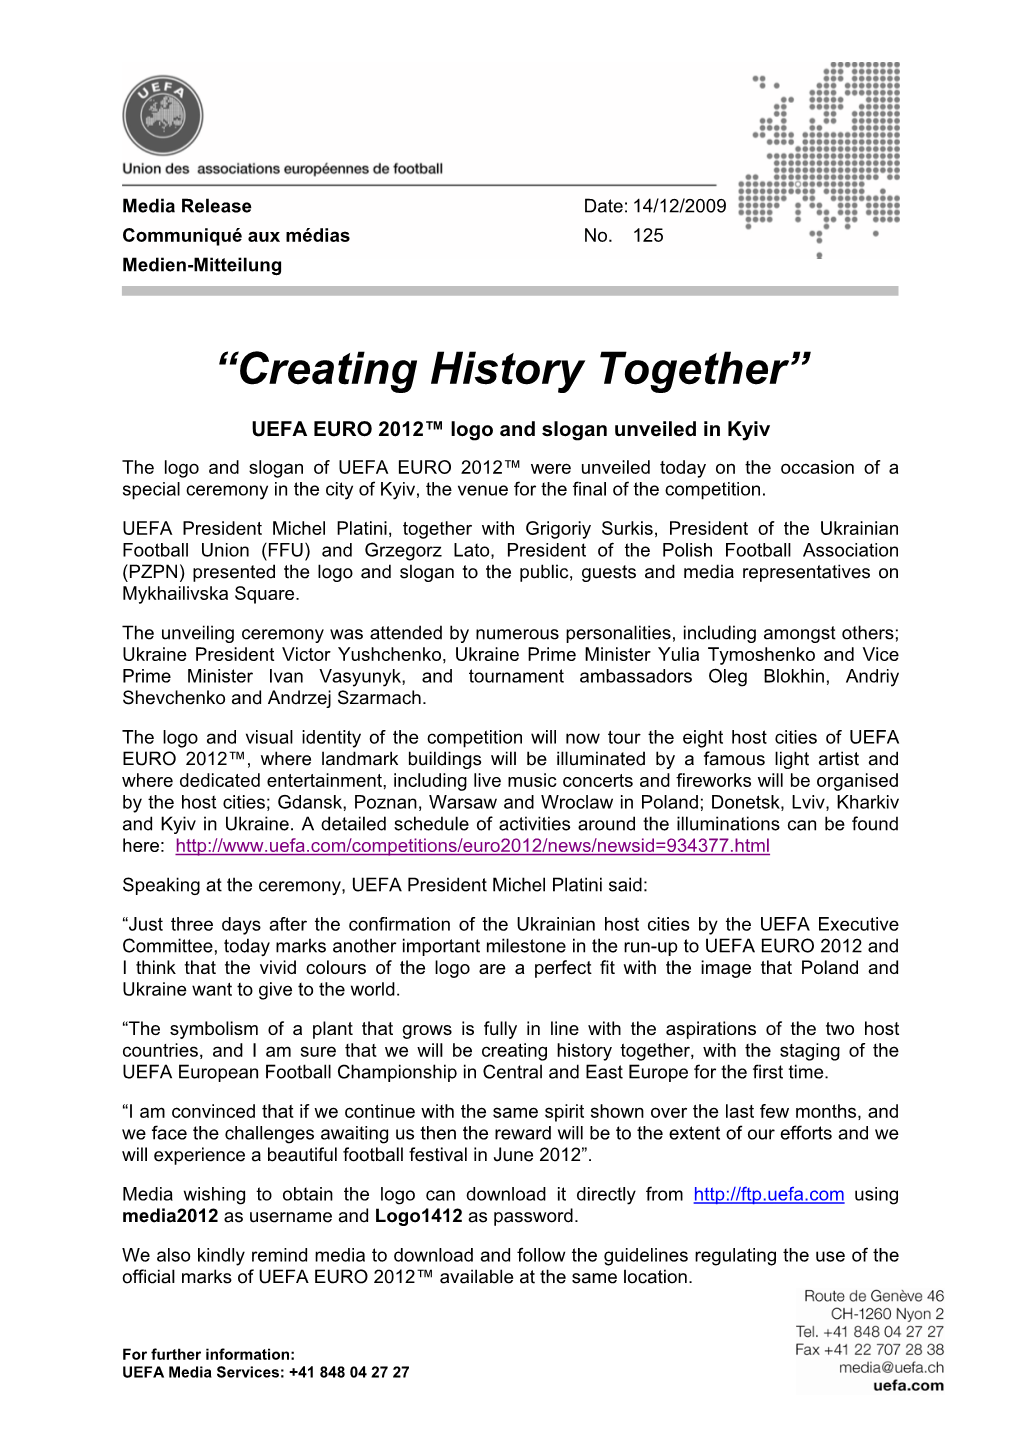 “Creating History Together”